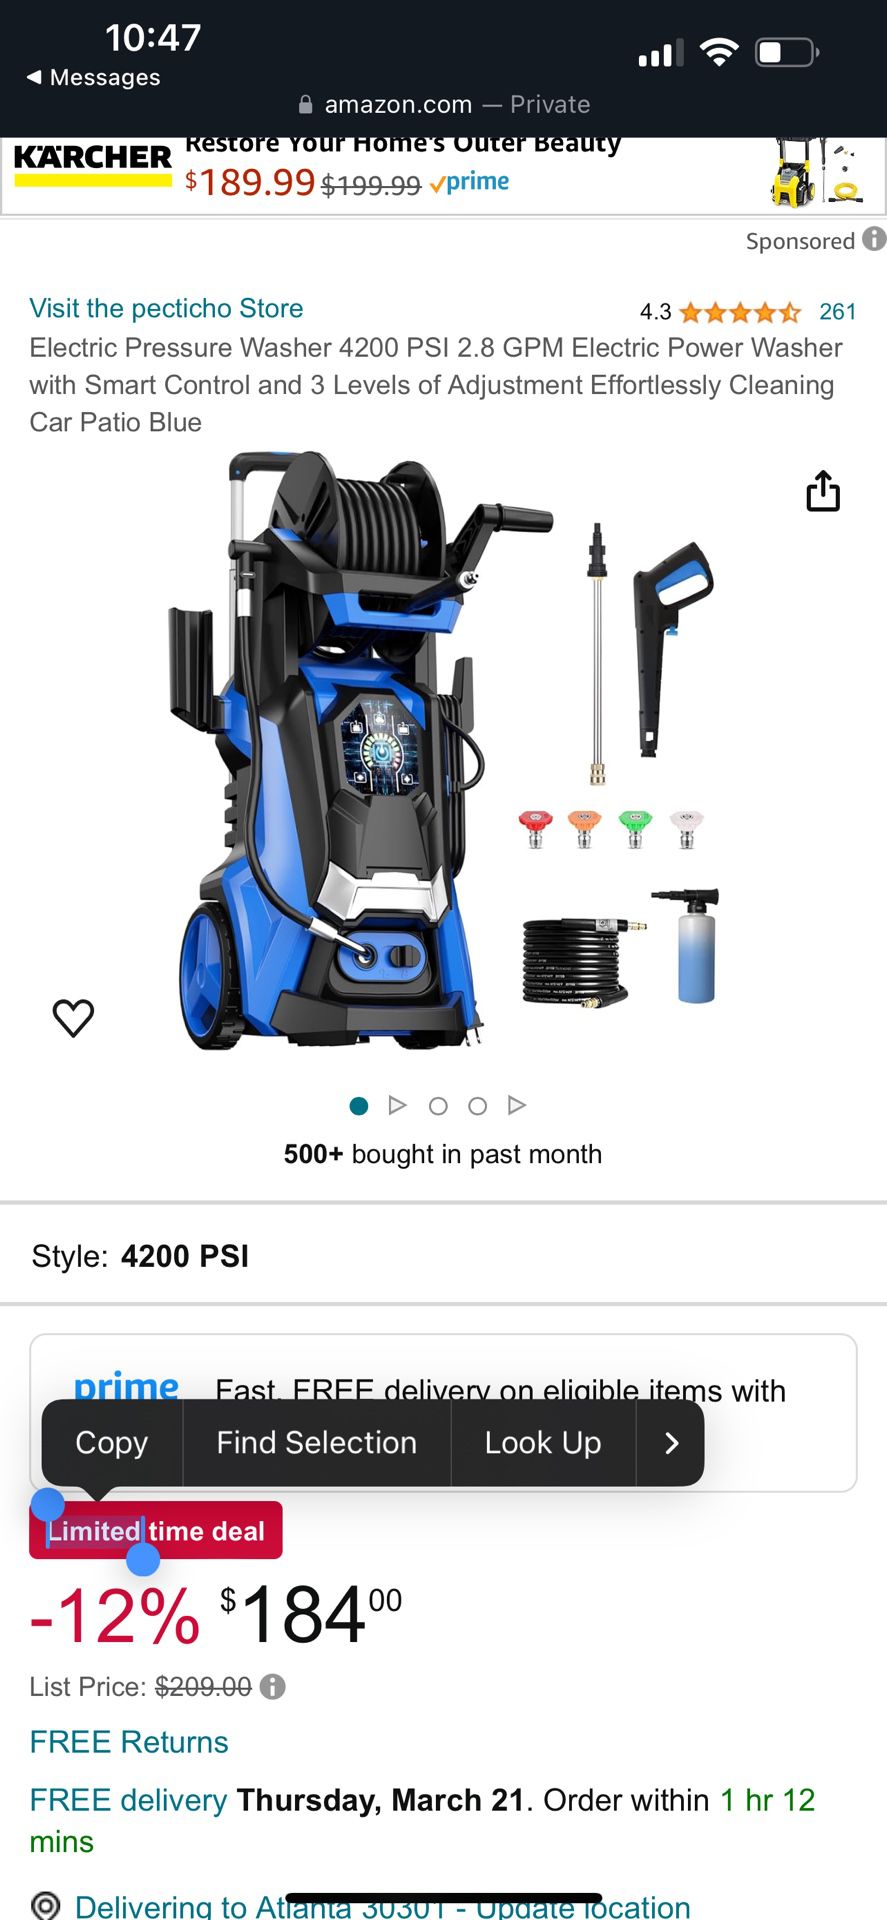 Electric Pressure Washer 4200 PSI 2.8 GPM Electric Power Washer with Smart Control and 3 Levels of Adjustment Effortlessly Cleaning Car Patio Blue